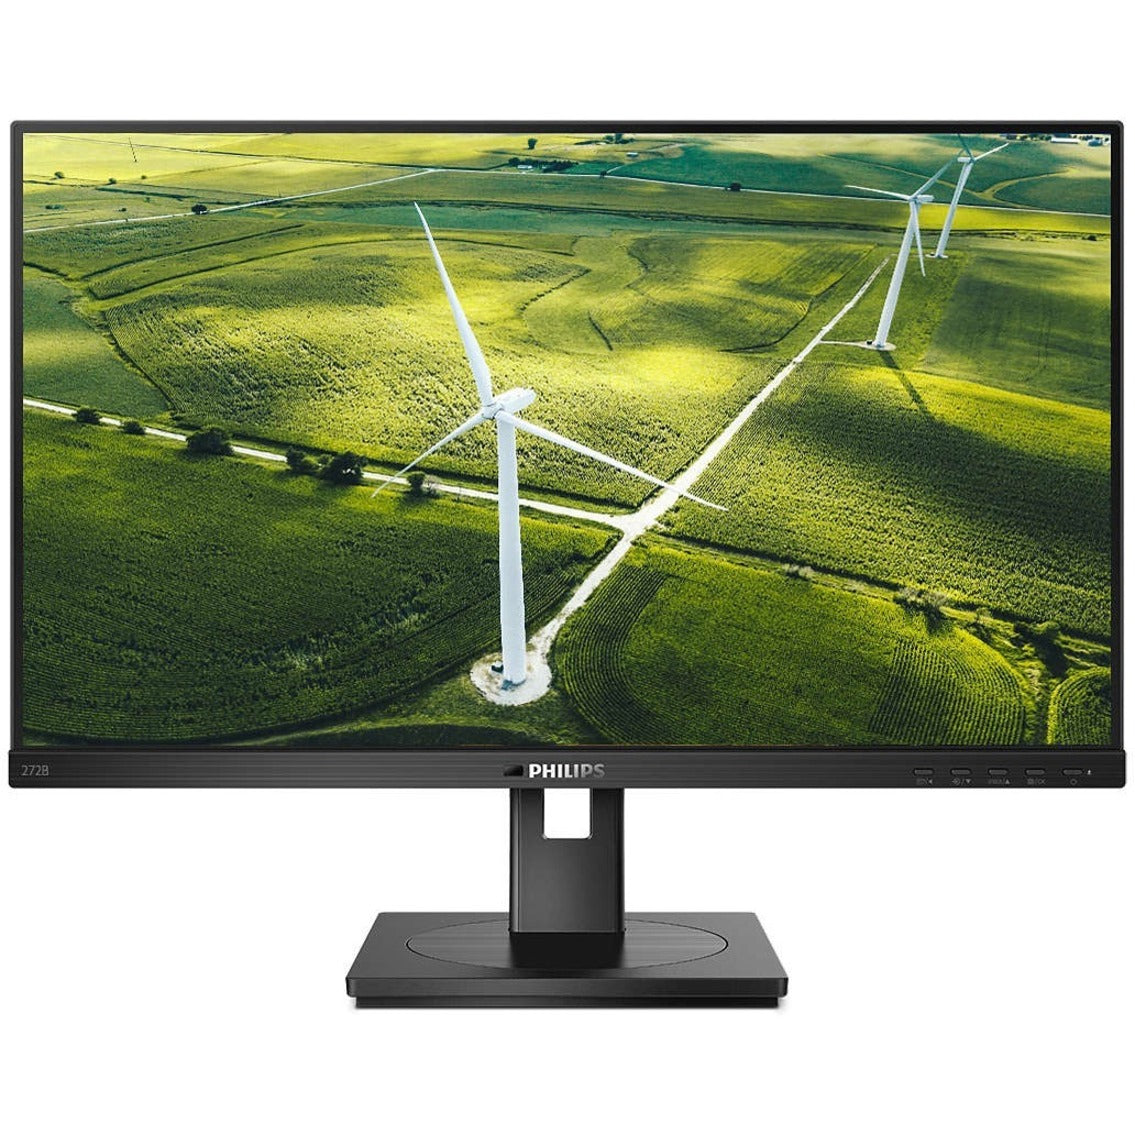 Philips 272B1G Business Monitor LCD Monitor with Super Energy Efficiency, 27" Full HD, Textured Black